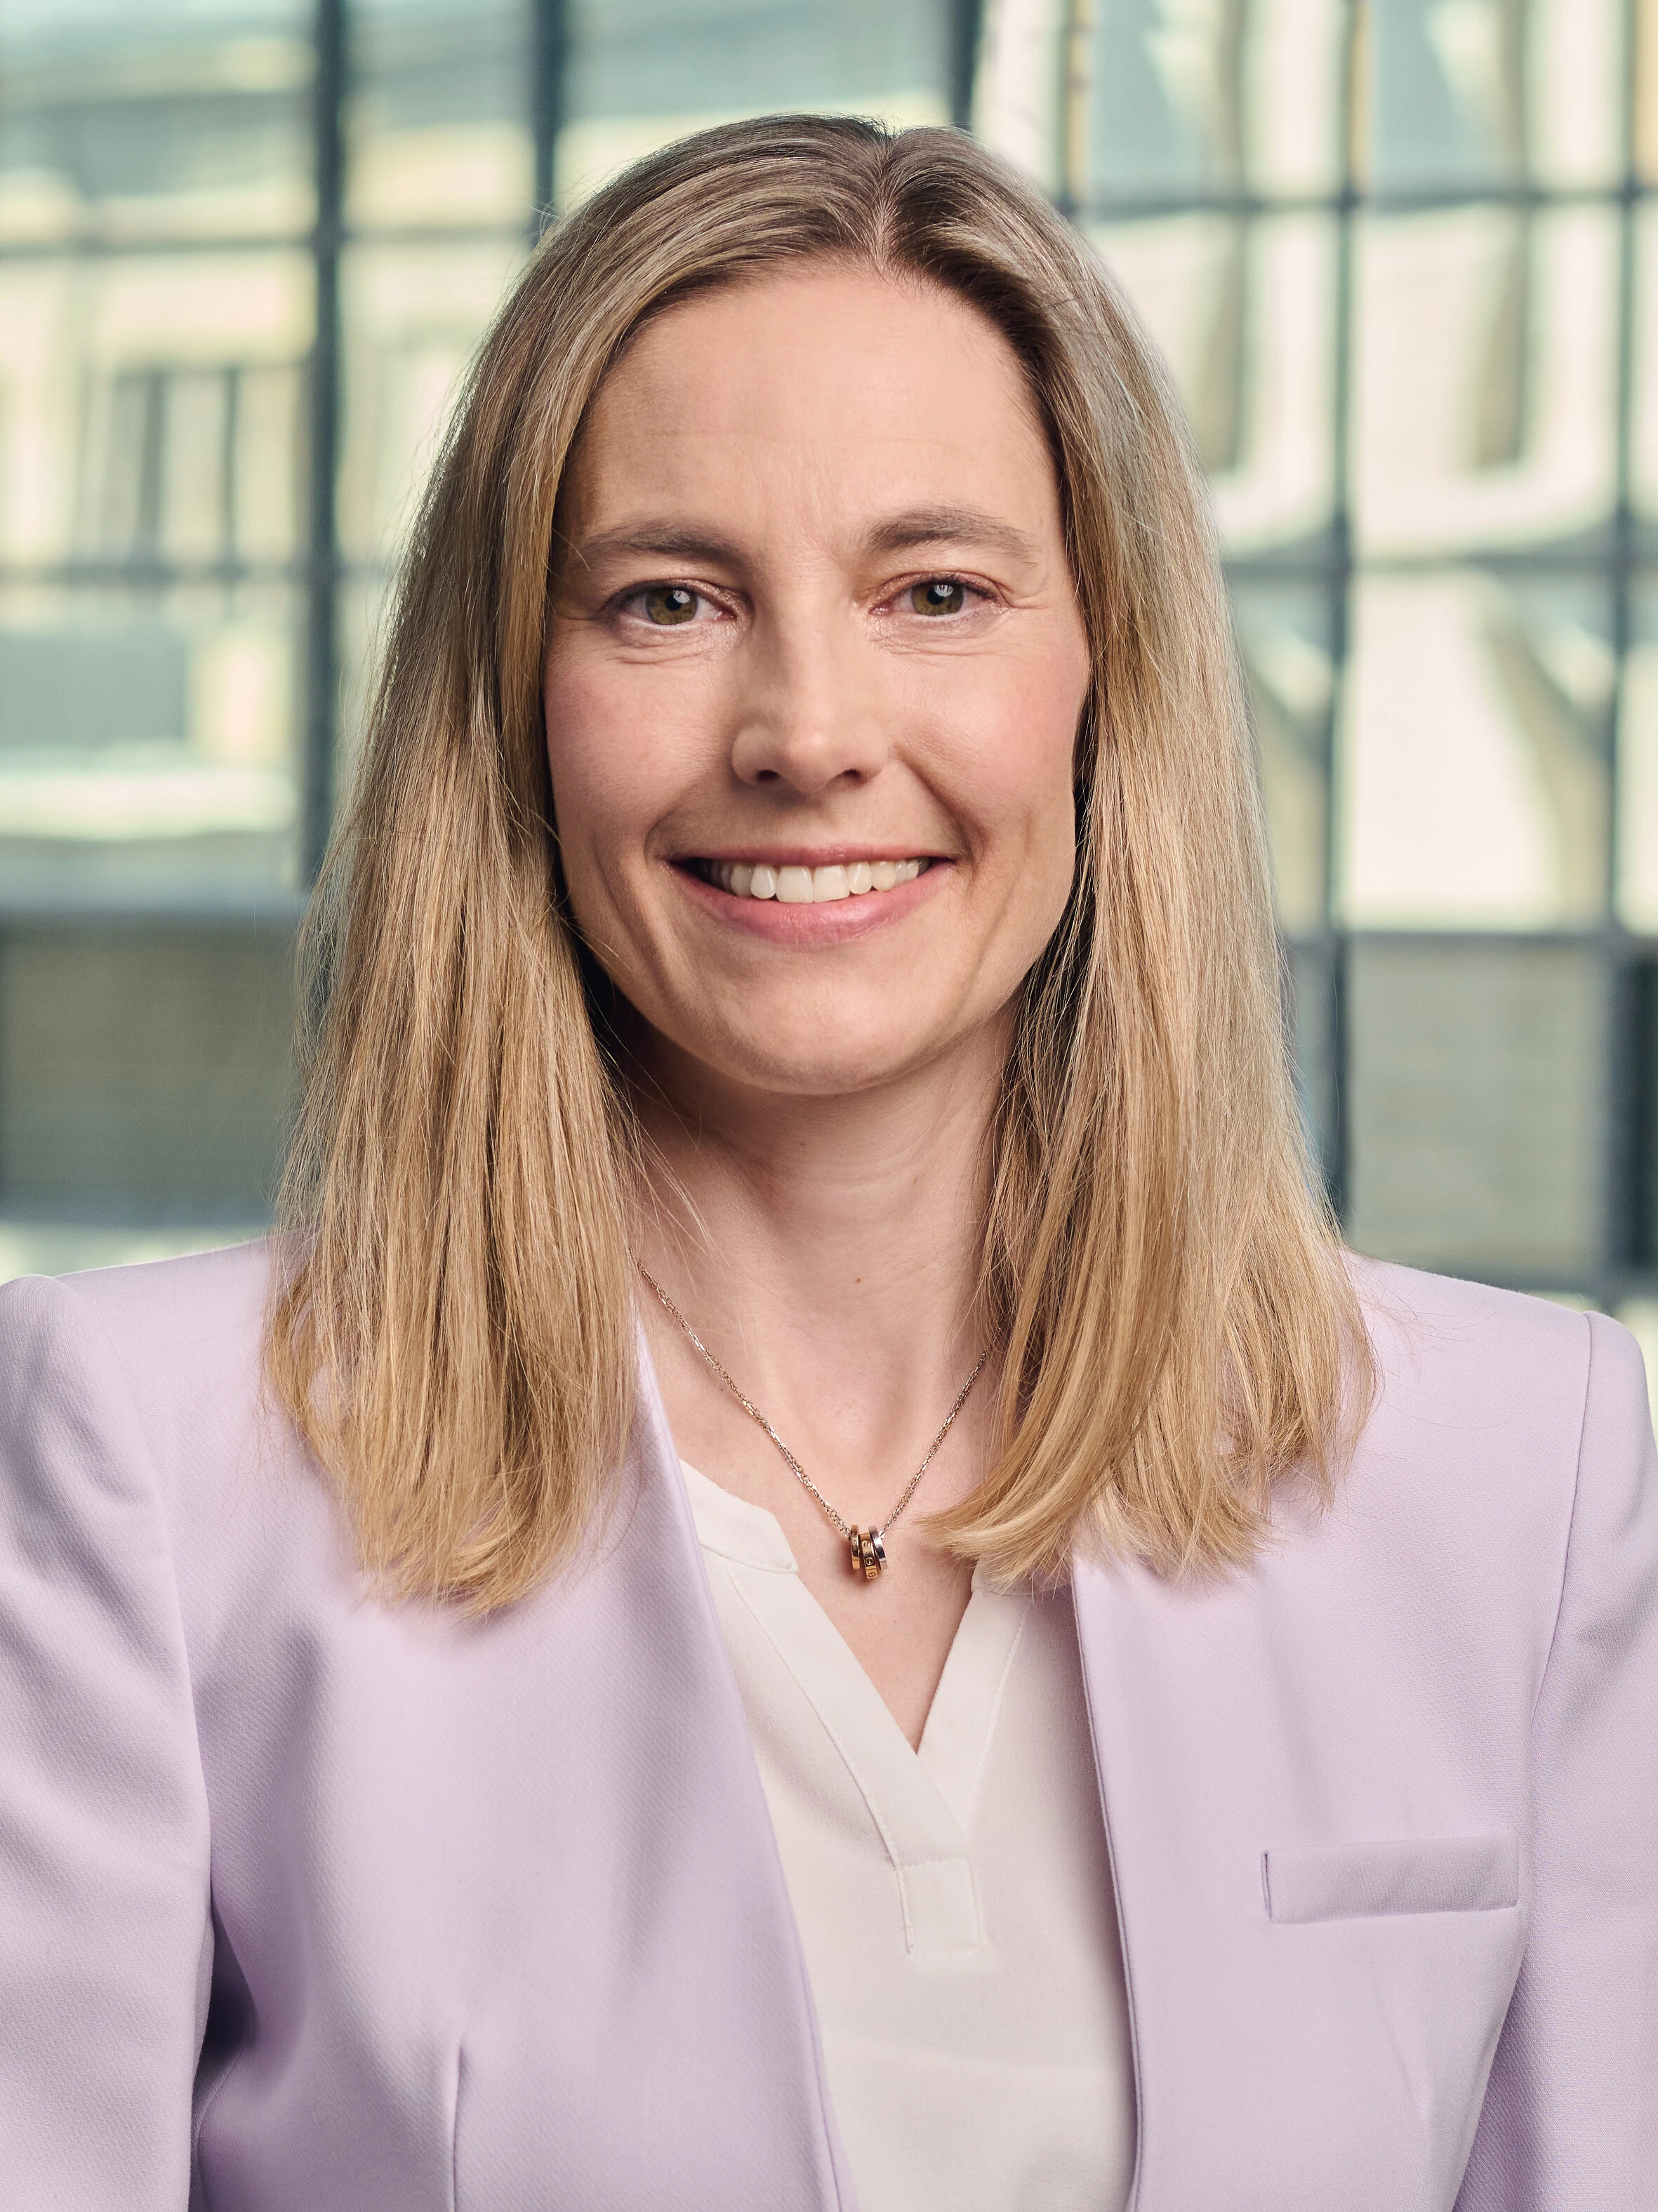 Nicole Pötsch, Head of North & Central Europe and Co-Head of Investments Europe at PIMCO Prime Real Estate